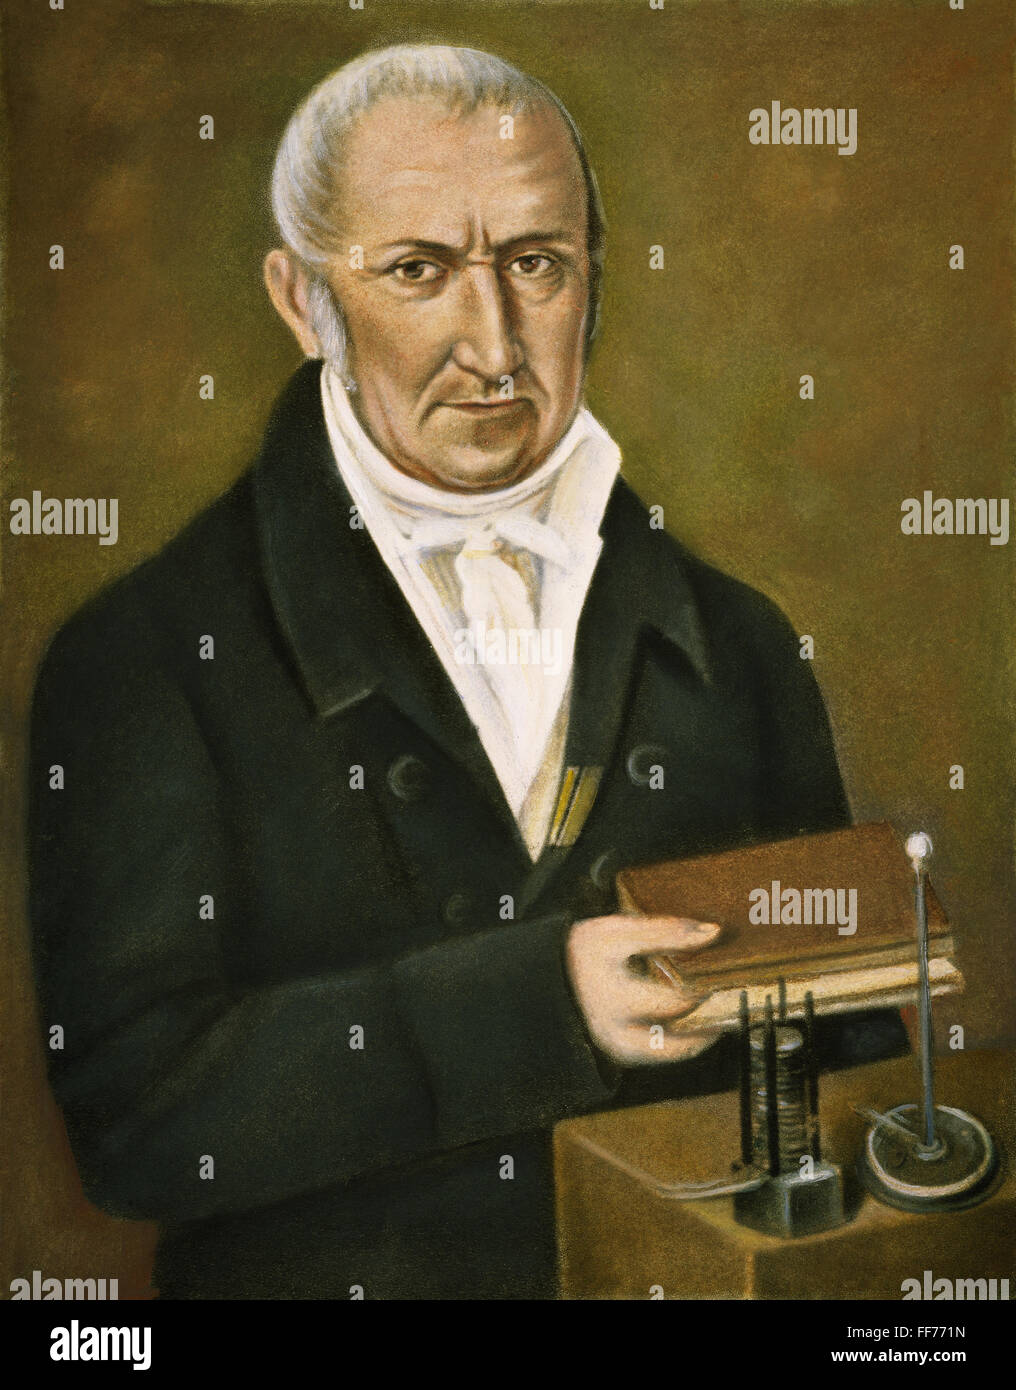 COUNT ALESSANDRO VOLTA /n(1745-1827). Italian physicist. Portrait by an unknown artist, with a voltaic pile shown in the right foreground. Stock Photo